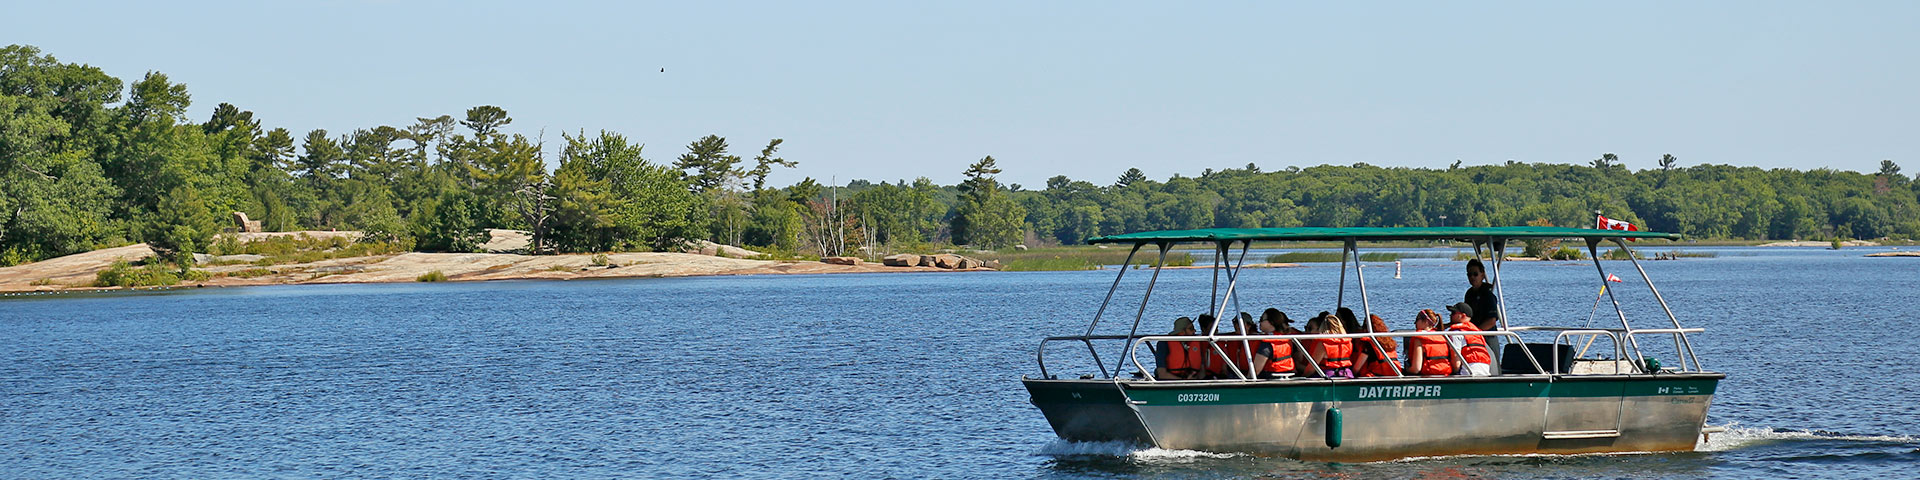 A boat transports passengers to an island.